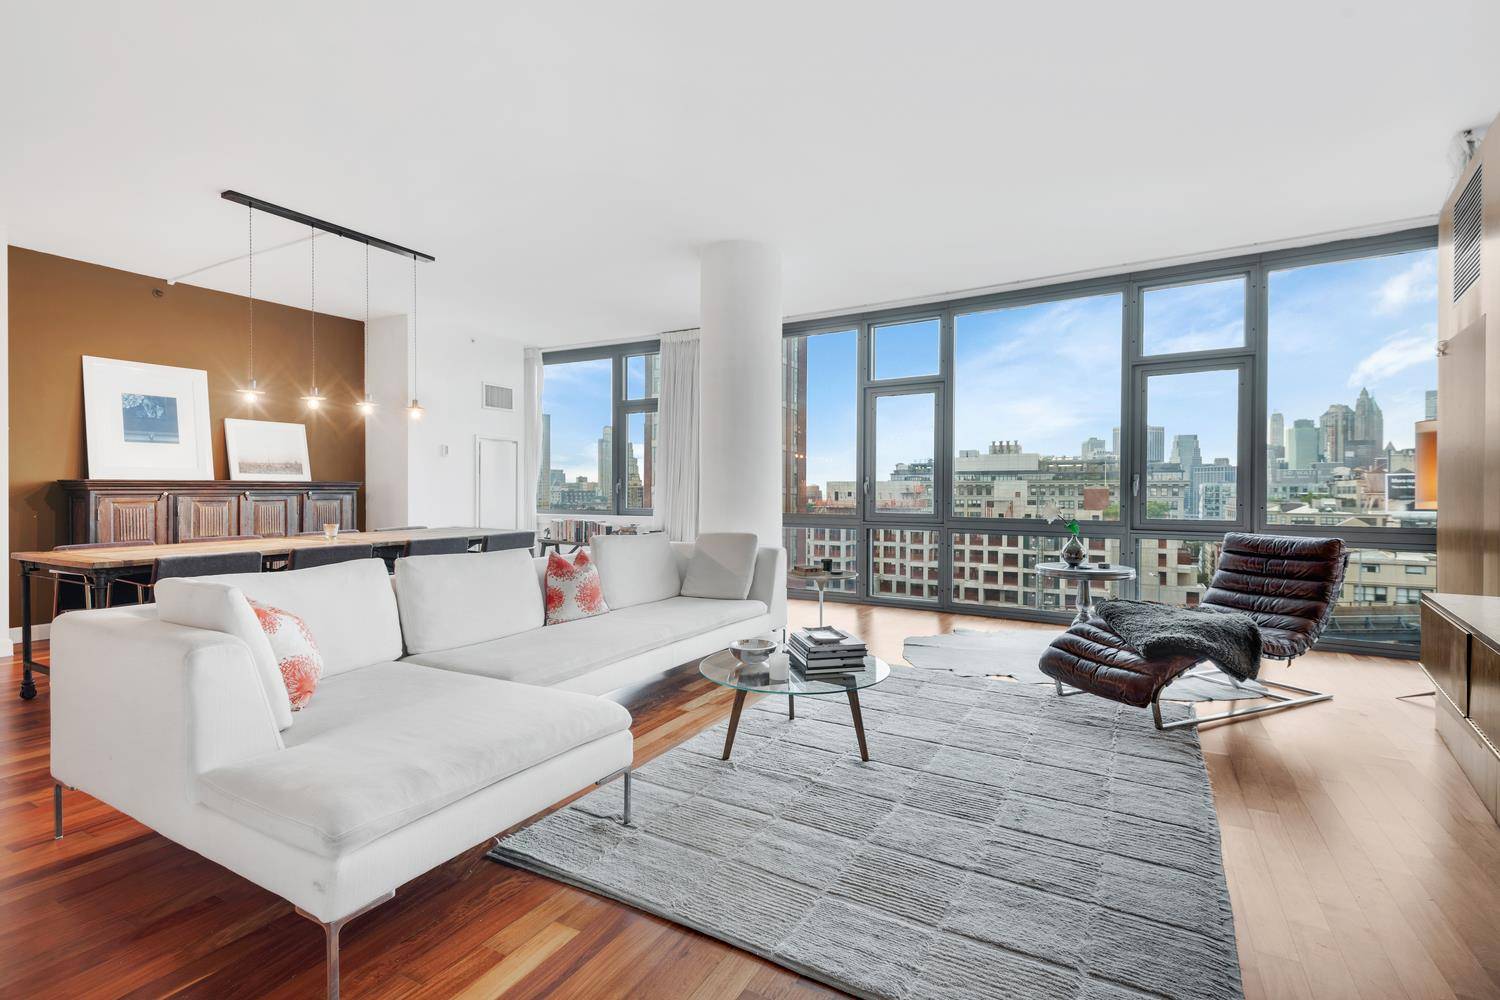 Luxury and Views combined to make the perfect Dumbo Home.